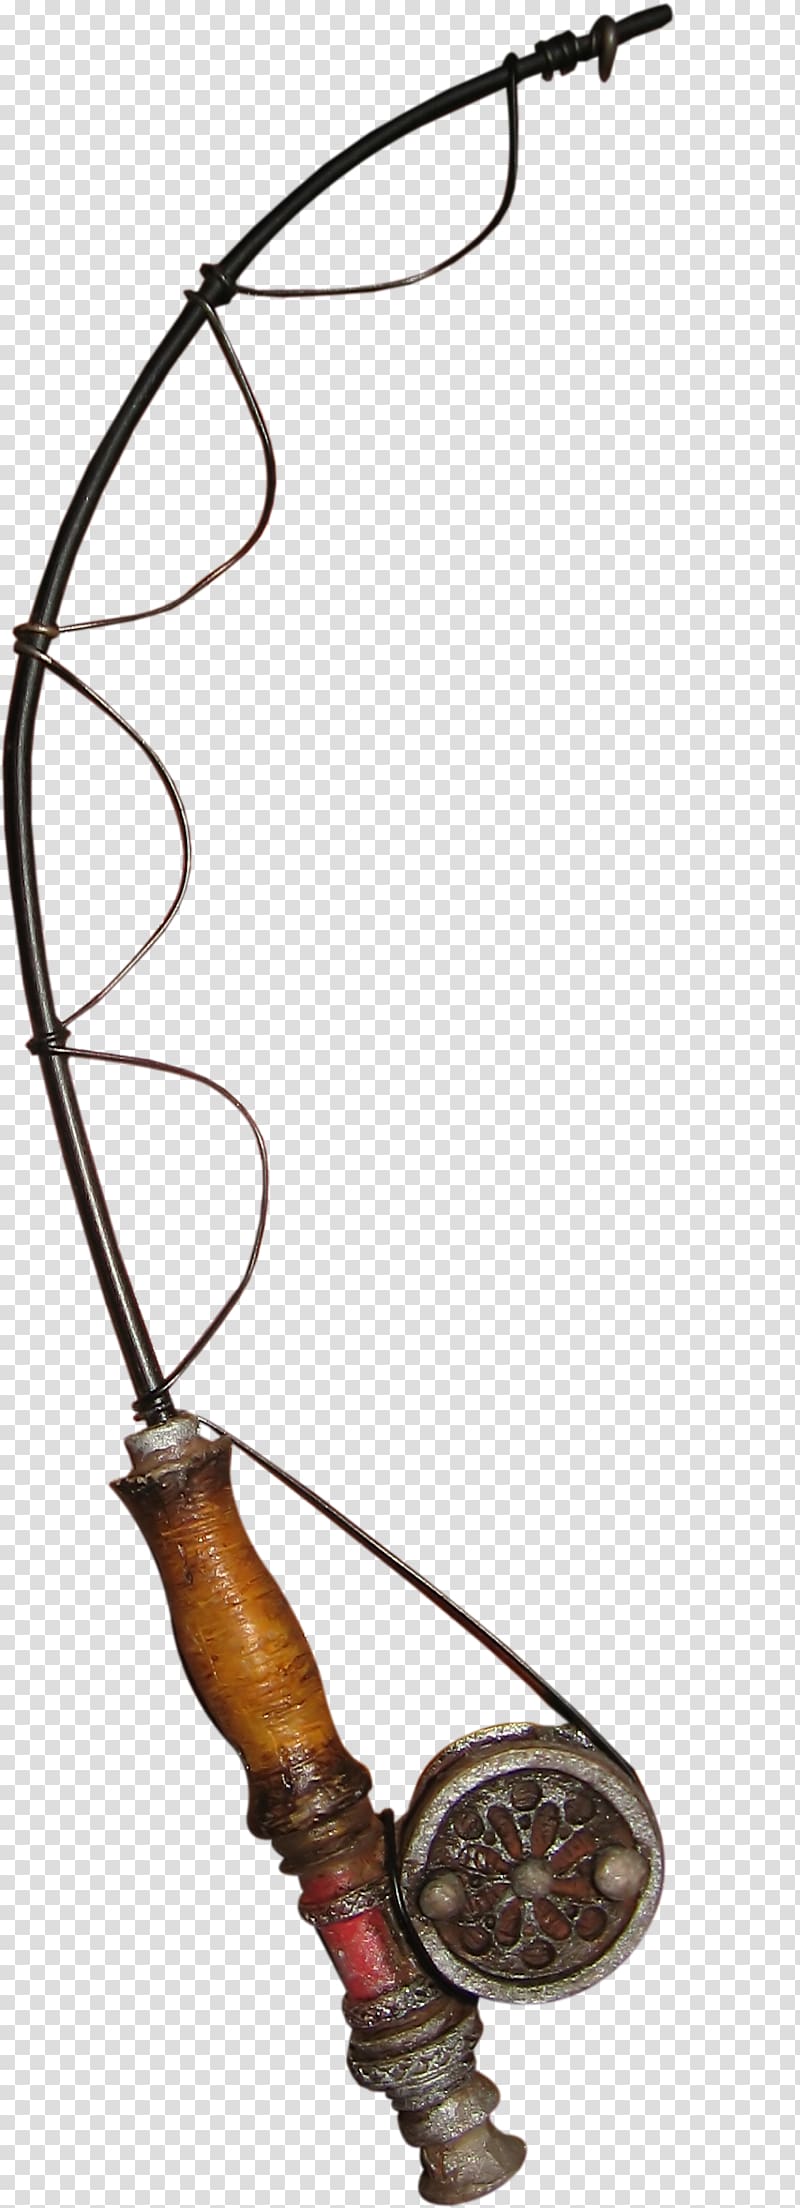 Fishing rod Fishing tackle Angling, Brown pretty fishing gear transparent background PNG clipart